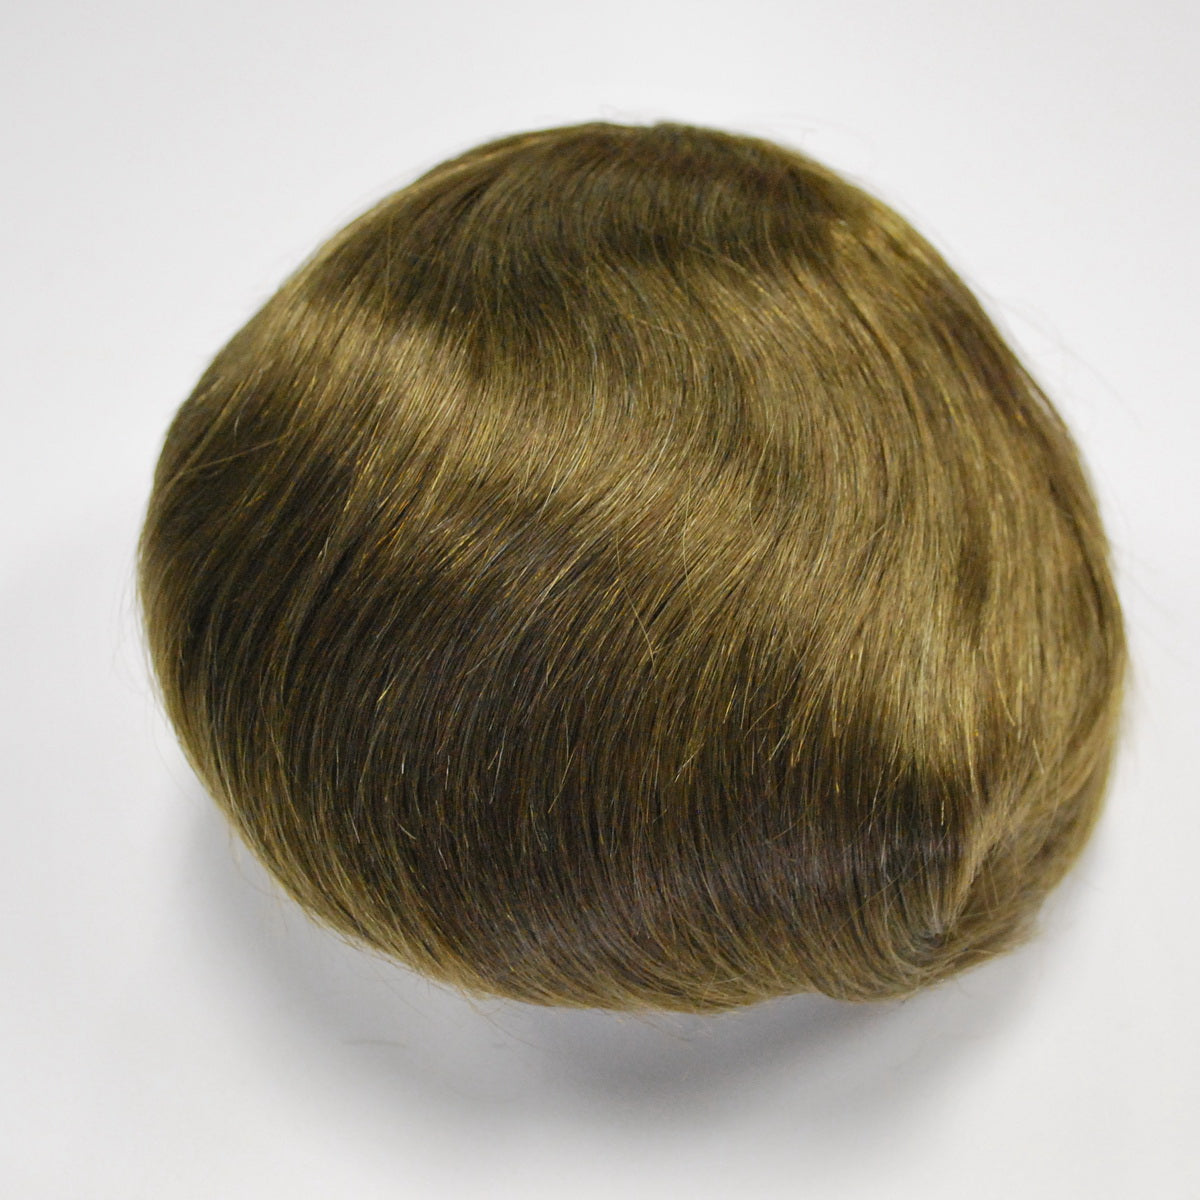 #5 light brown human hair system for men French lace with PU men toupee wig